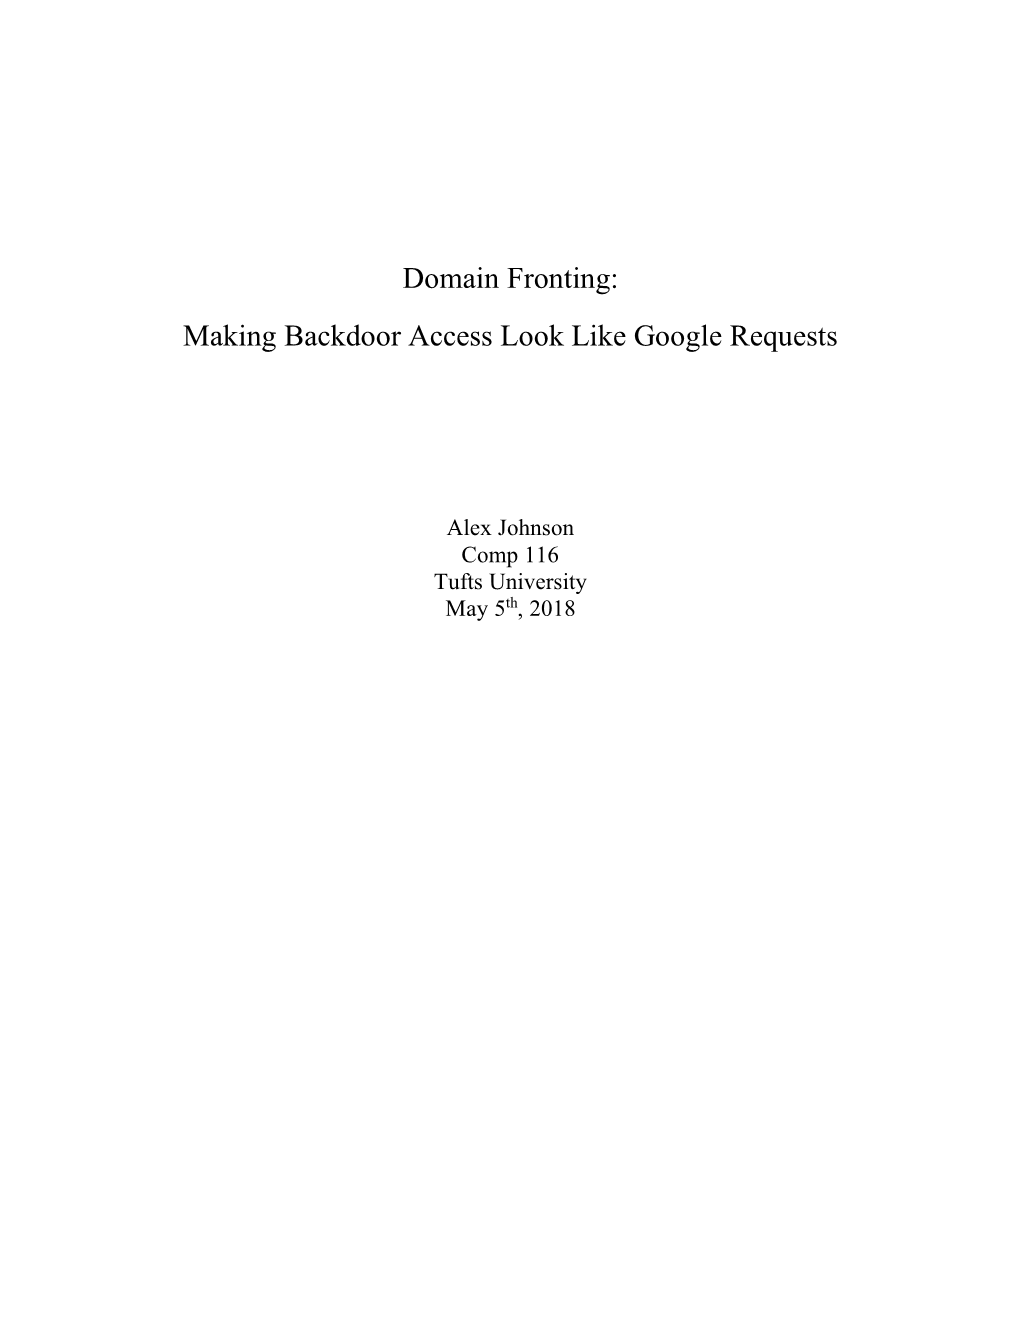 Domain Fronting: Making Backdoor Access Look Like Google Requests